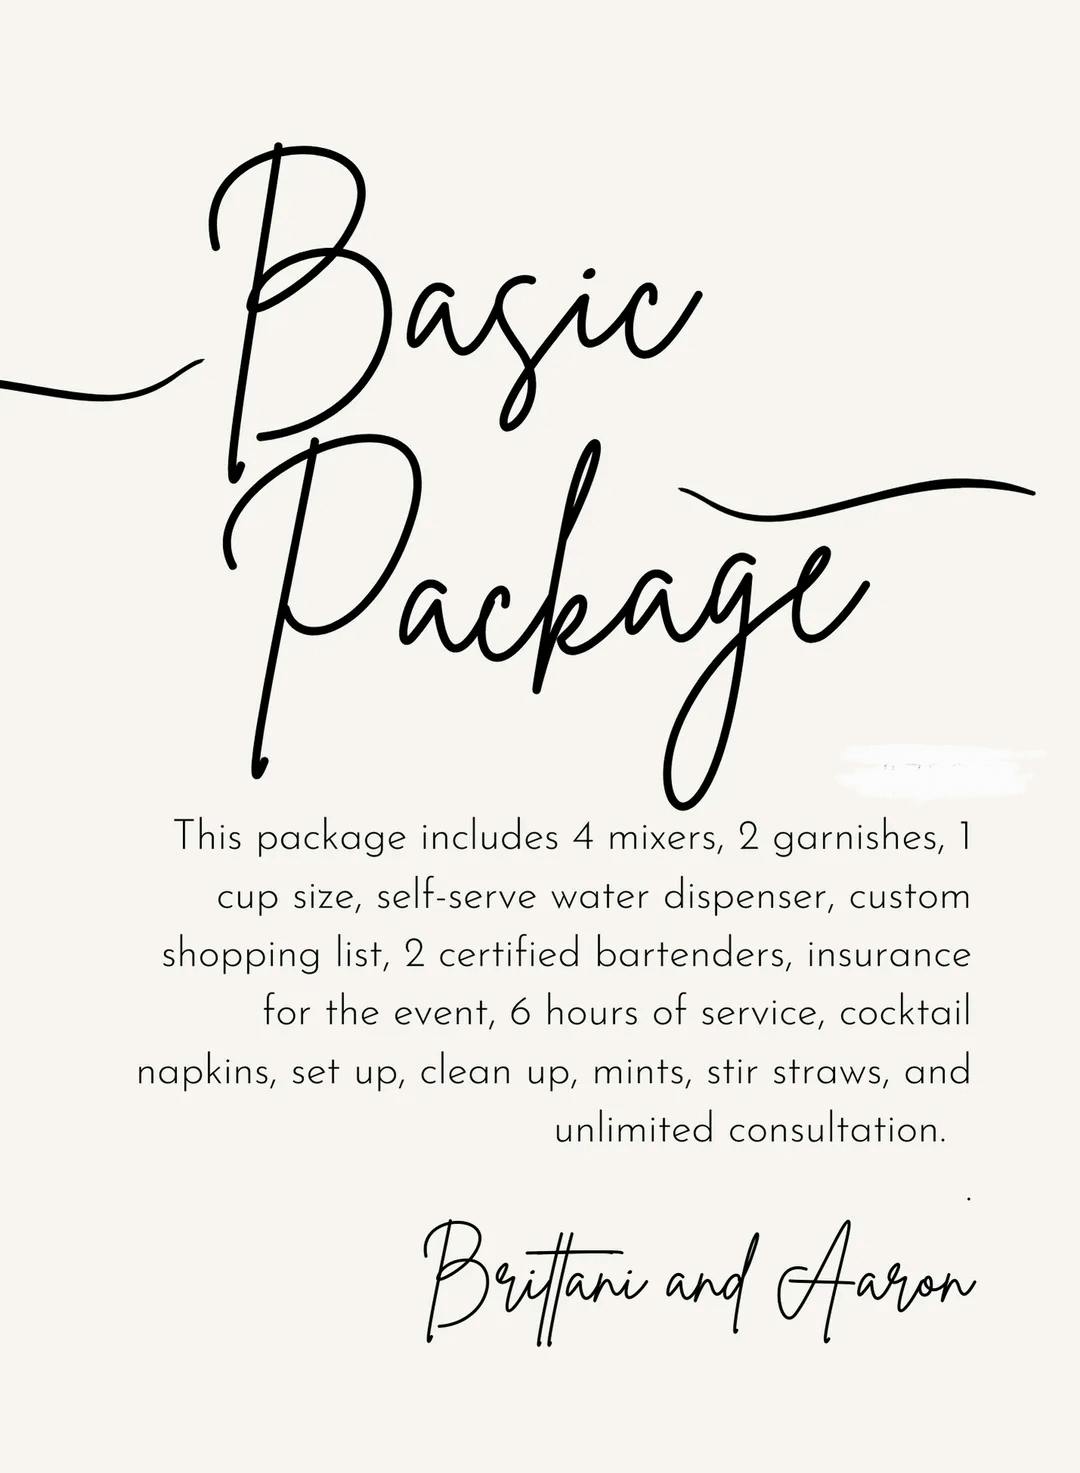 The Basic Package